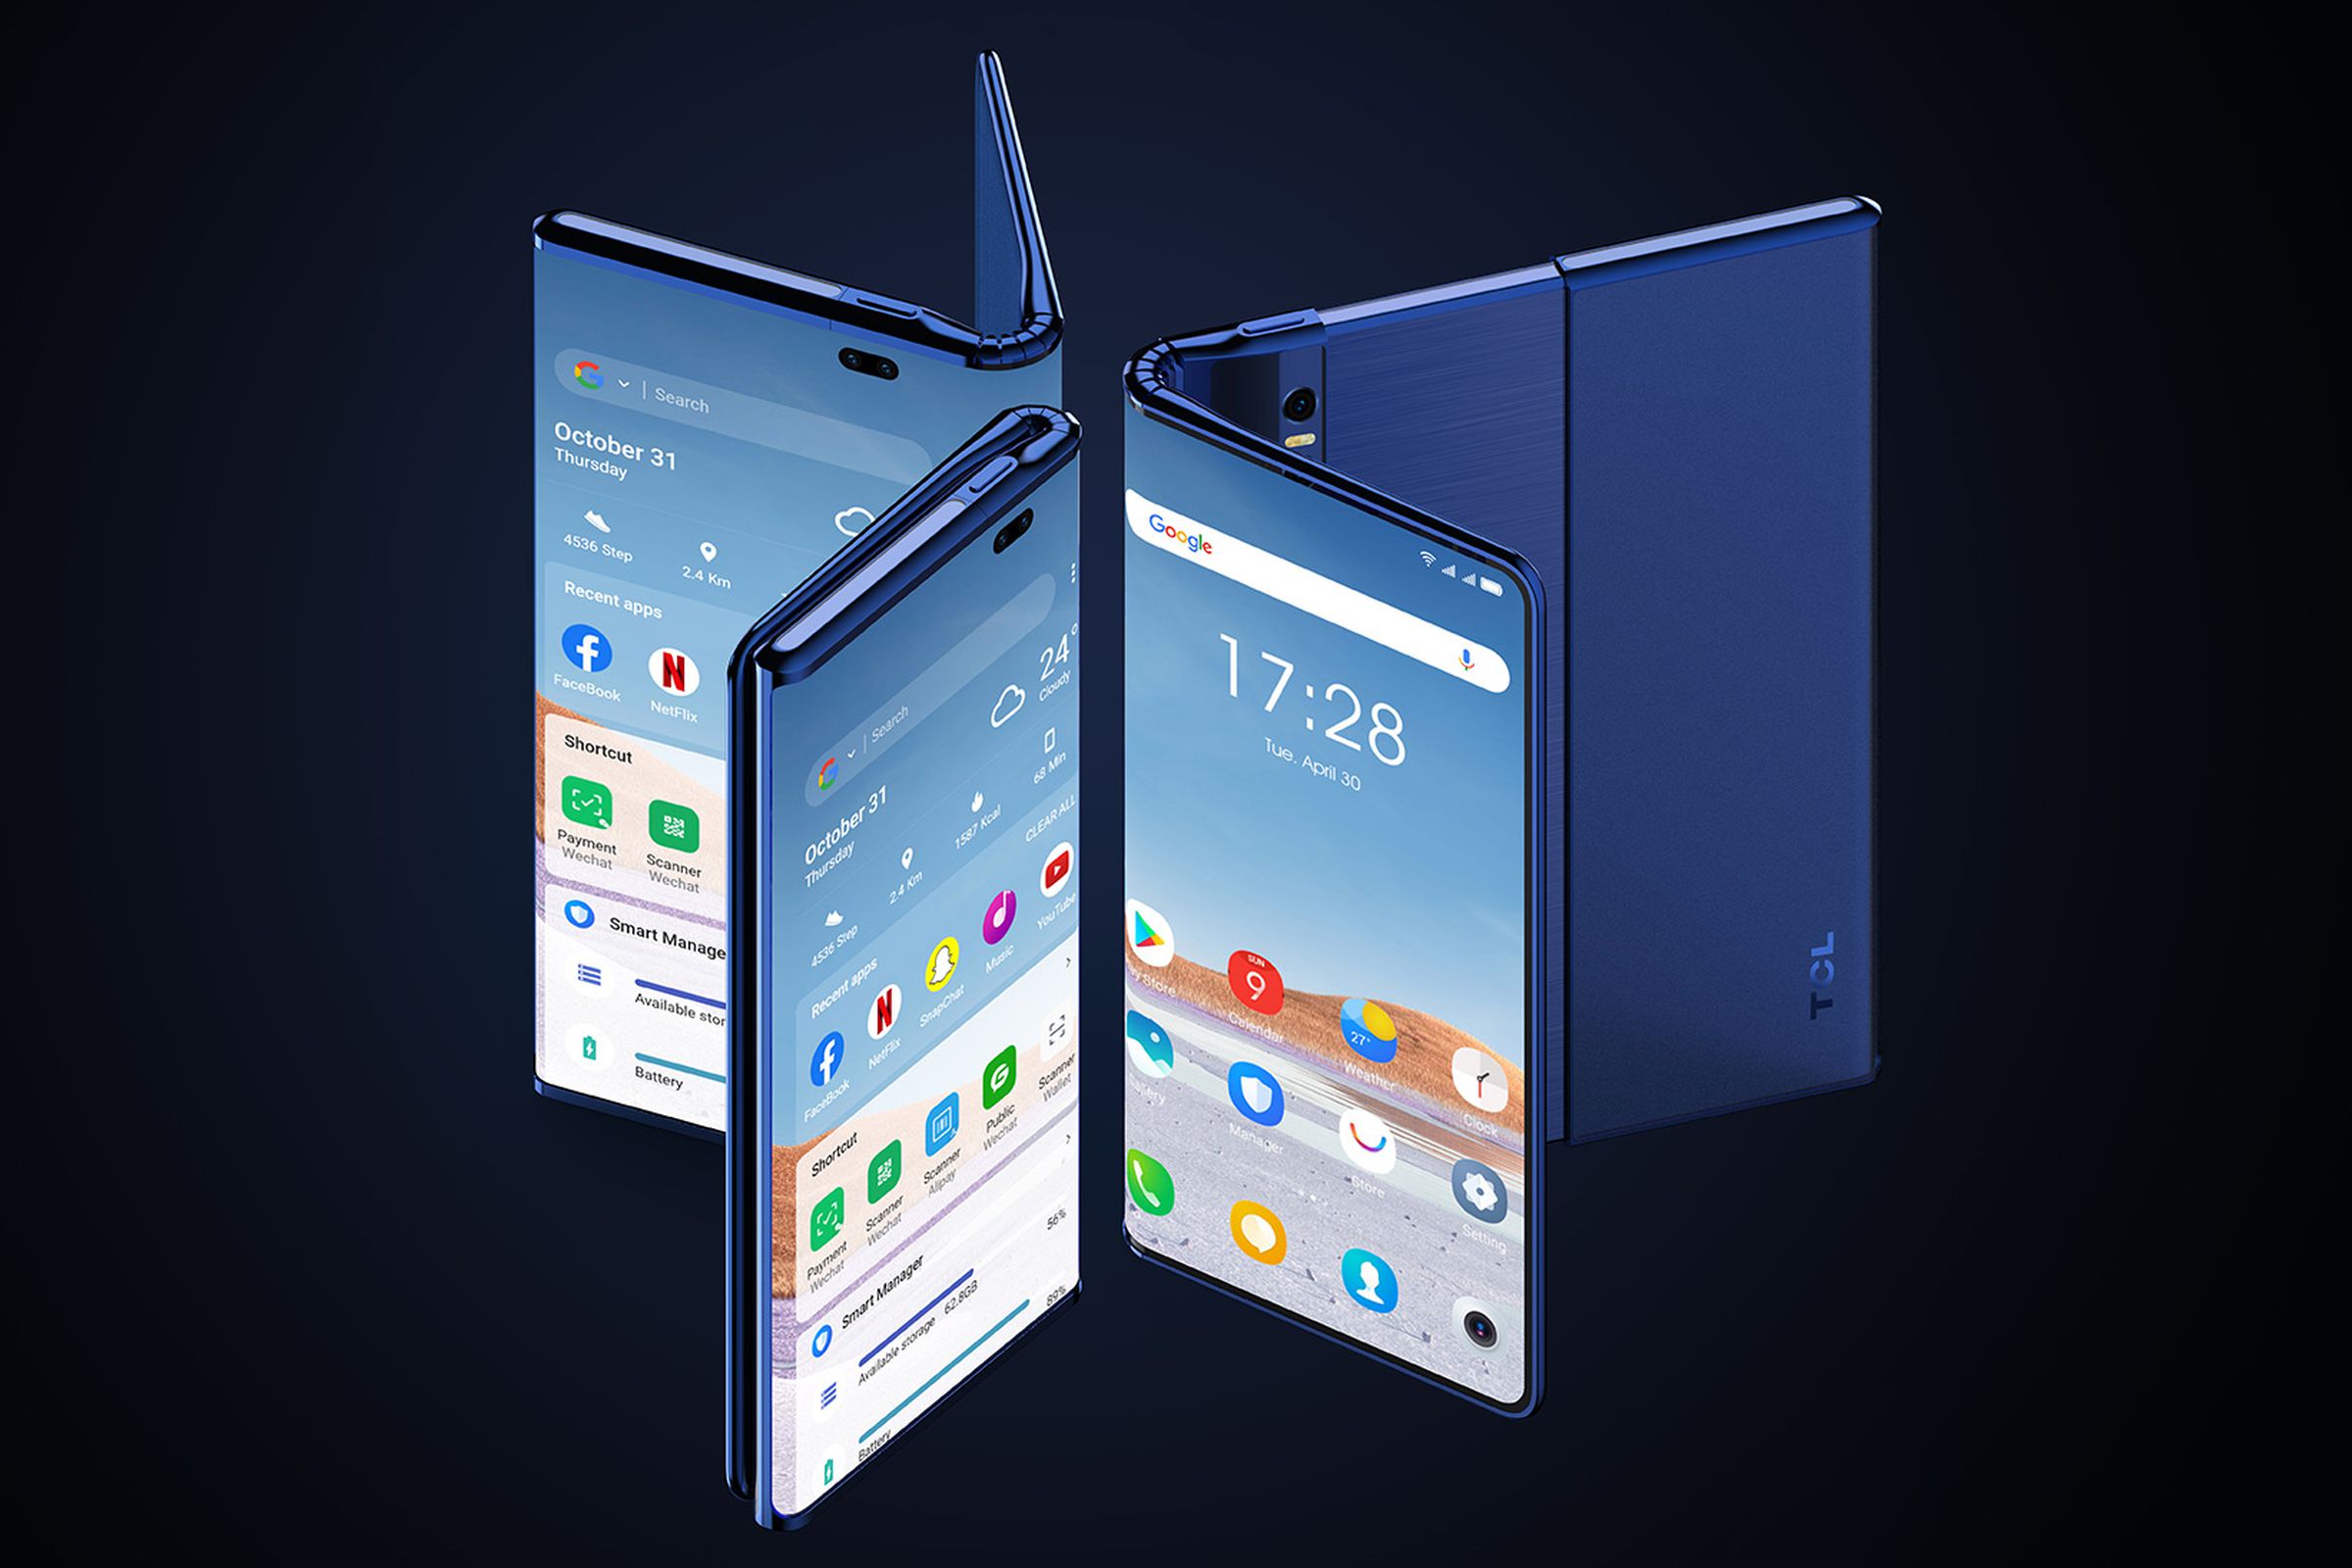 TCL’s concept uses a folding hinge and extendable mechanism to expand from phone to tablet.